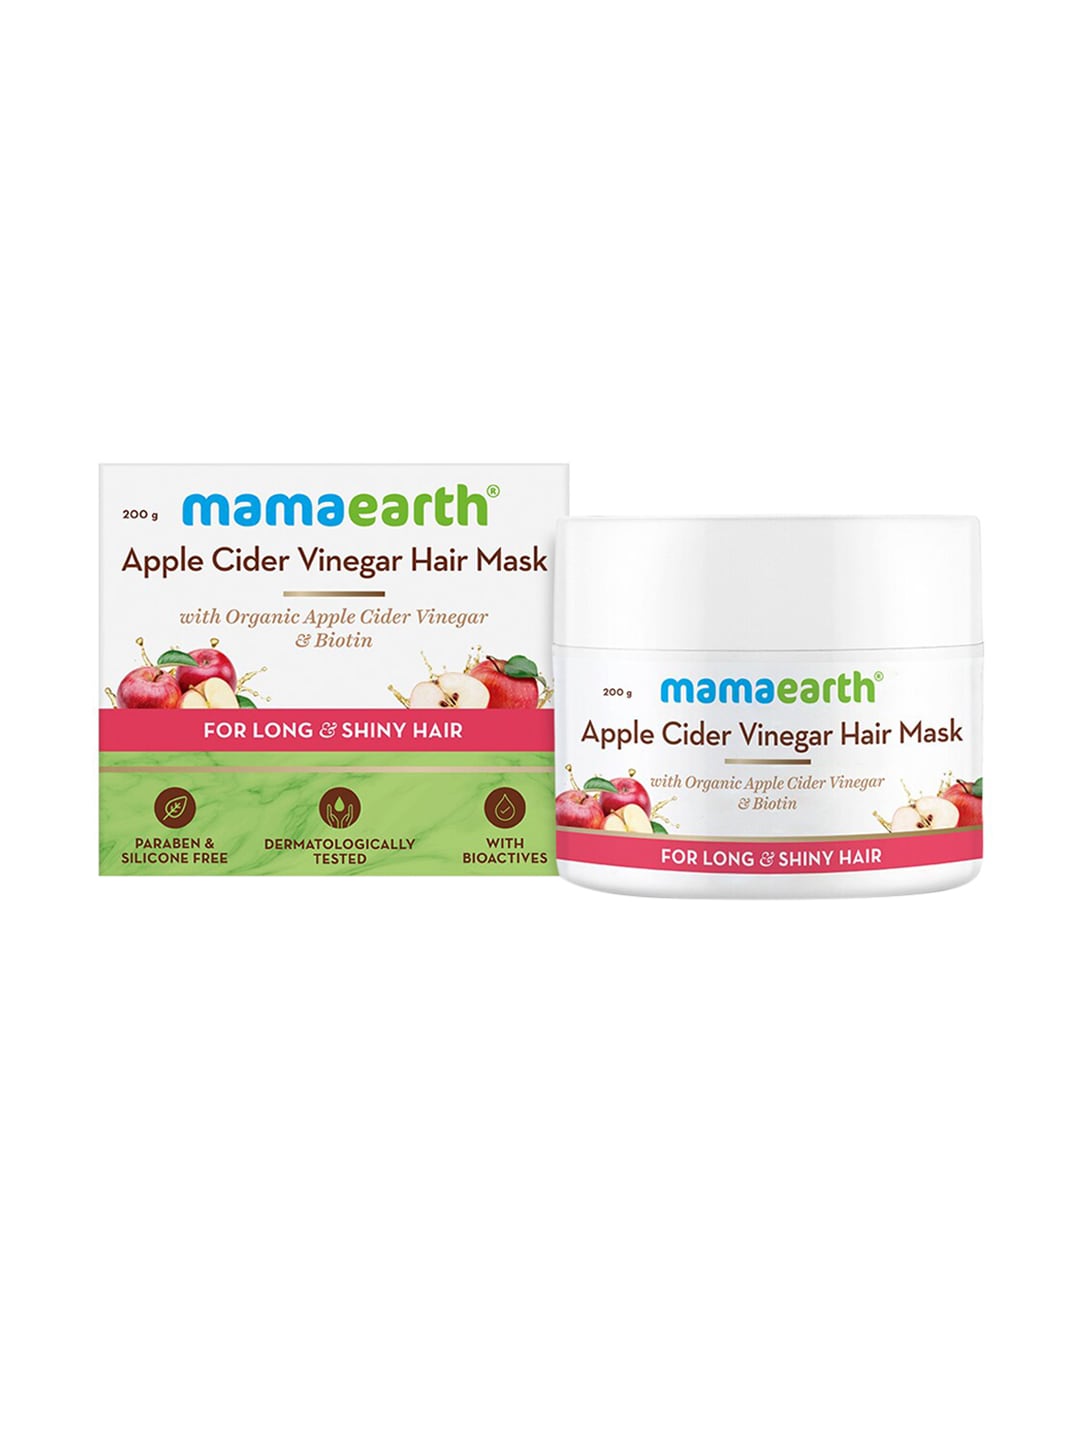 Mamaearth Apple Cider Vinegar Hair Mask with Organic Apple Cider Vinegar & Biotin - 200 g Price in India